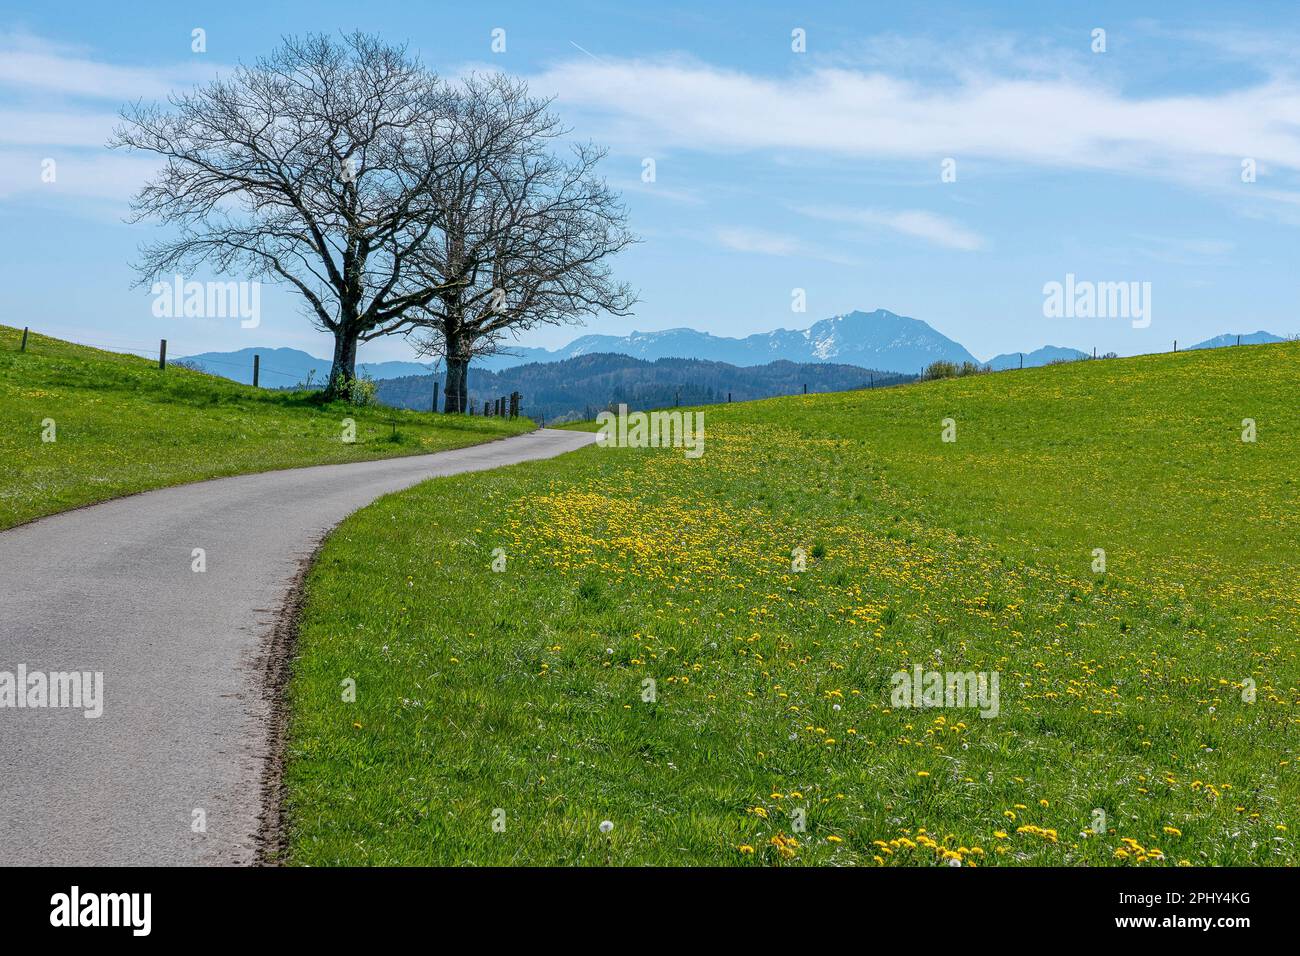 Road through spring meadow, Ester mountains in background, Germany, Bavaria, Region Habach bei Murnau Stock Photo